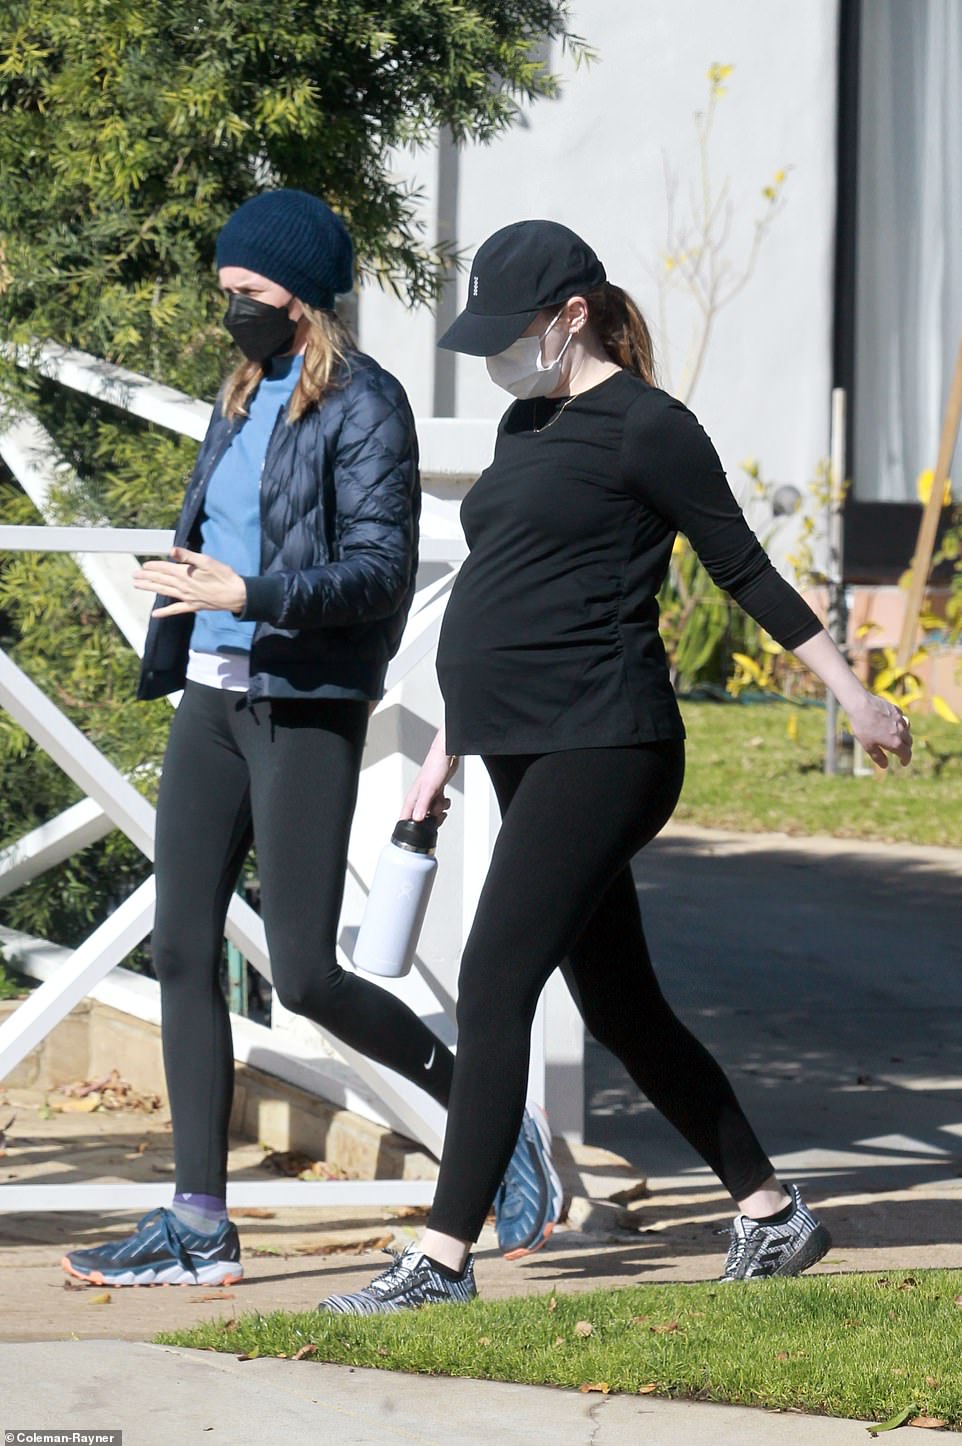 She wore an all black outfit with leggings and a tight flitted shirt that accentuated her belly, with a cap and sneakers